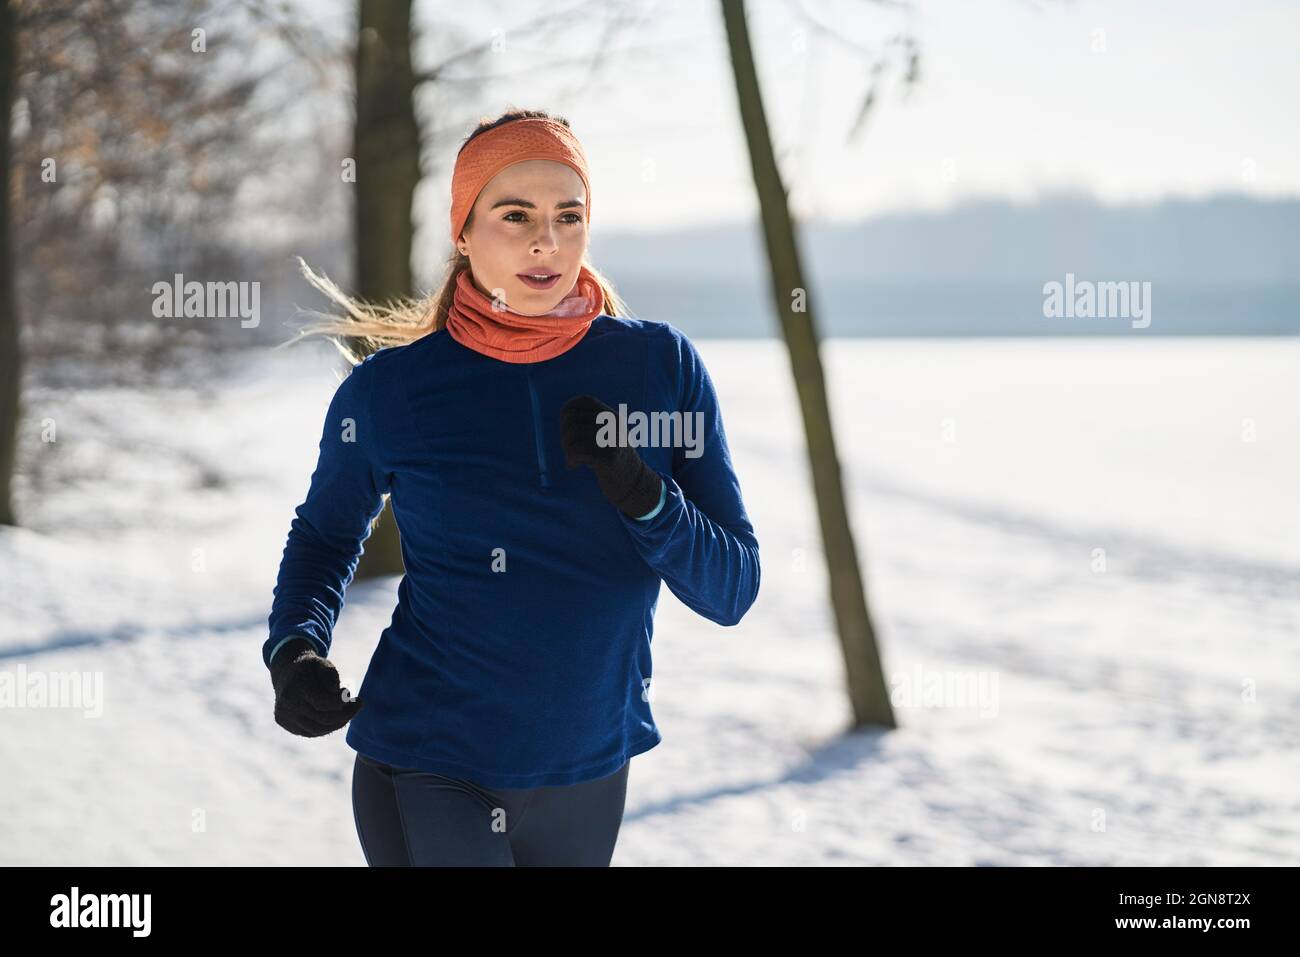 Young woman in sports clothing jogging during winter Stock Photo